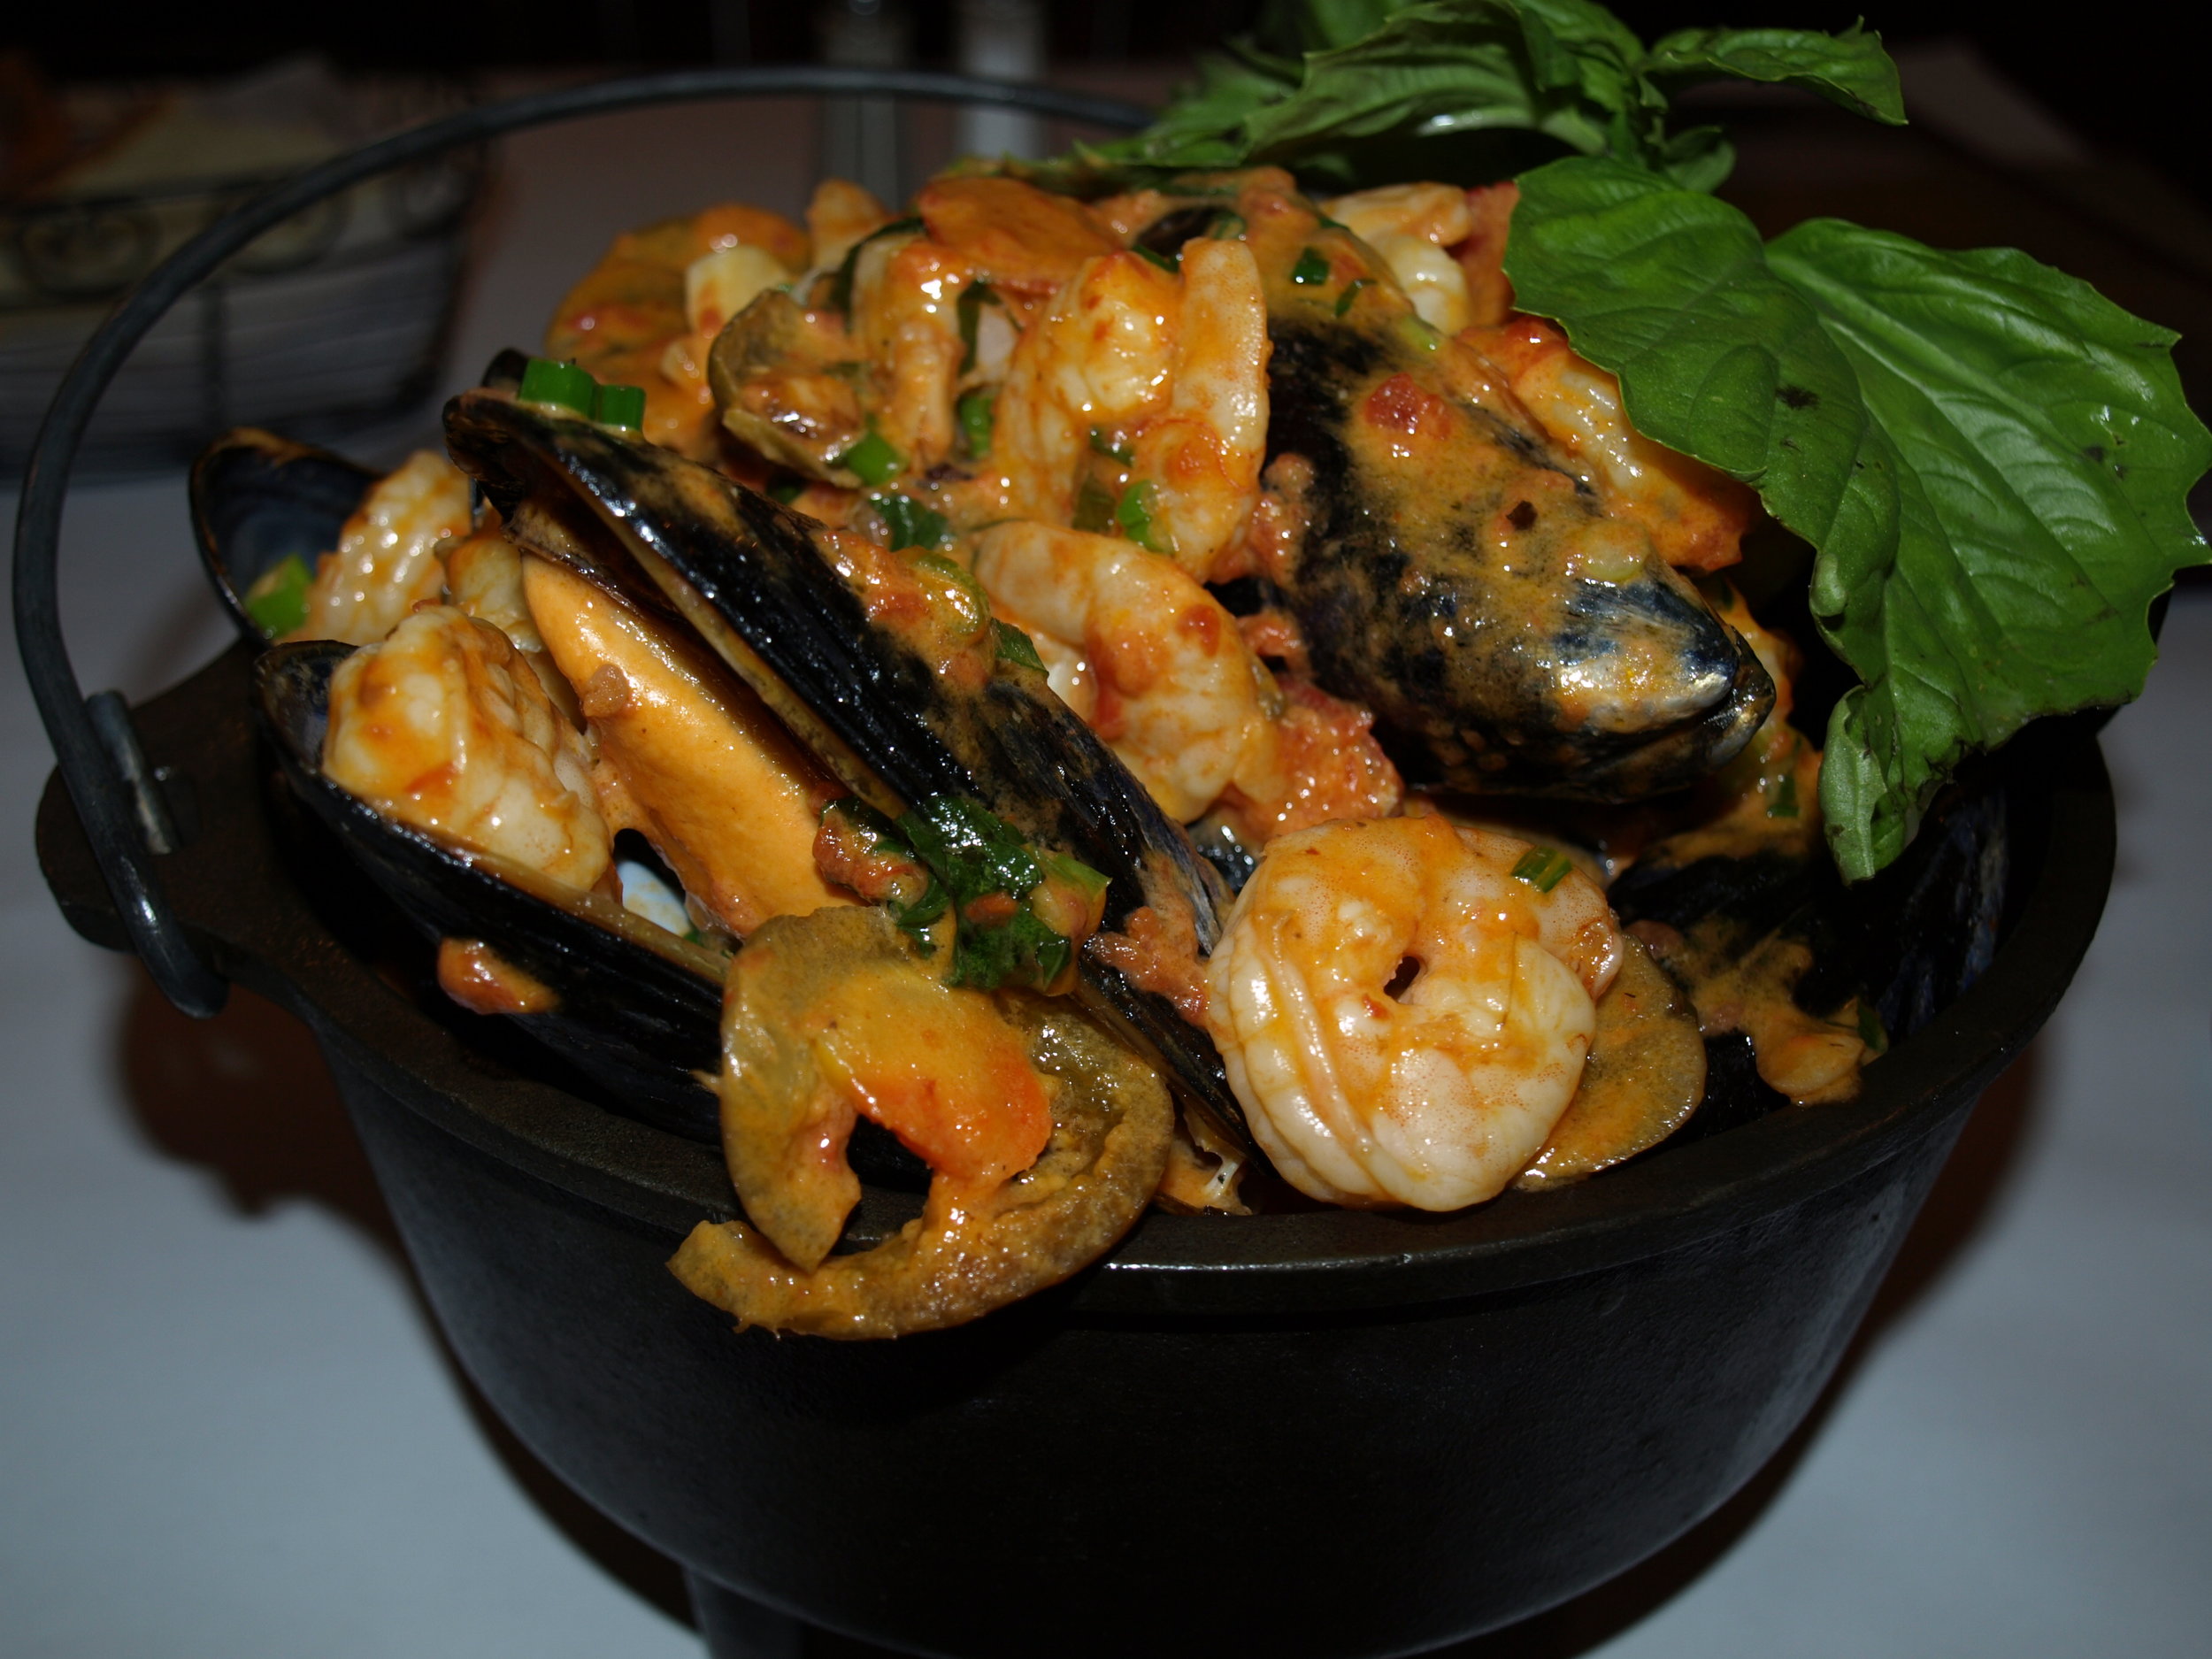   Mussels Mandolino ($15.95) brings together mussels, baby shrimp and cherry peppers in a light cream sauce.   Long Islander News Photo/Connor  Beach 